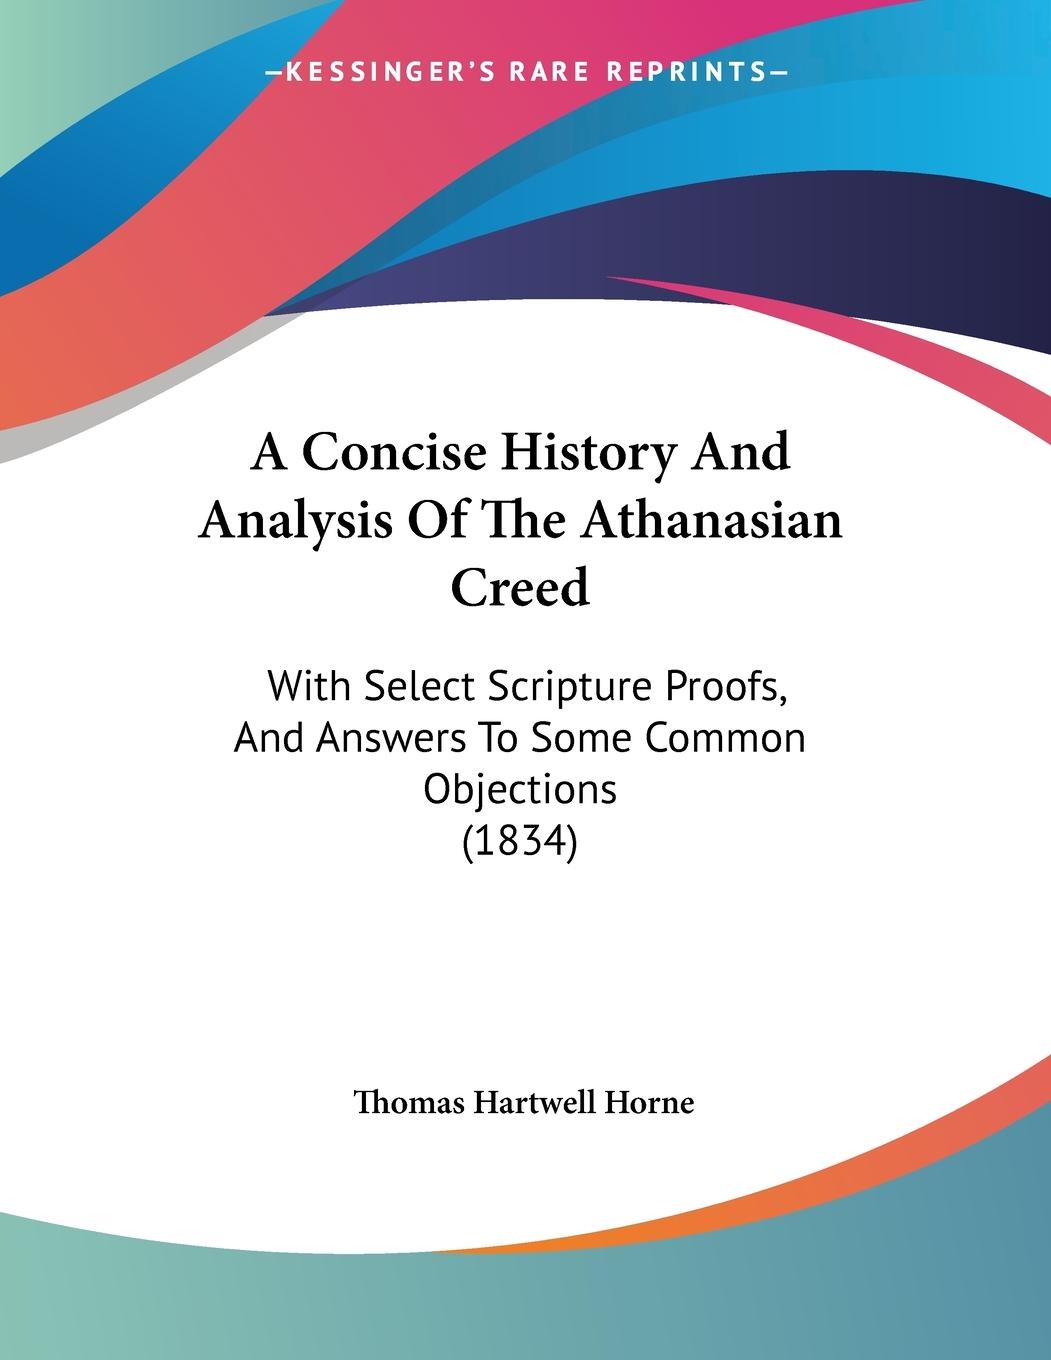 A Concise History And Analysis Of The Athanasian Creed - Horne, Thomas Hartwell